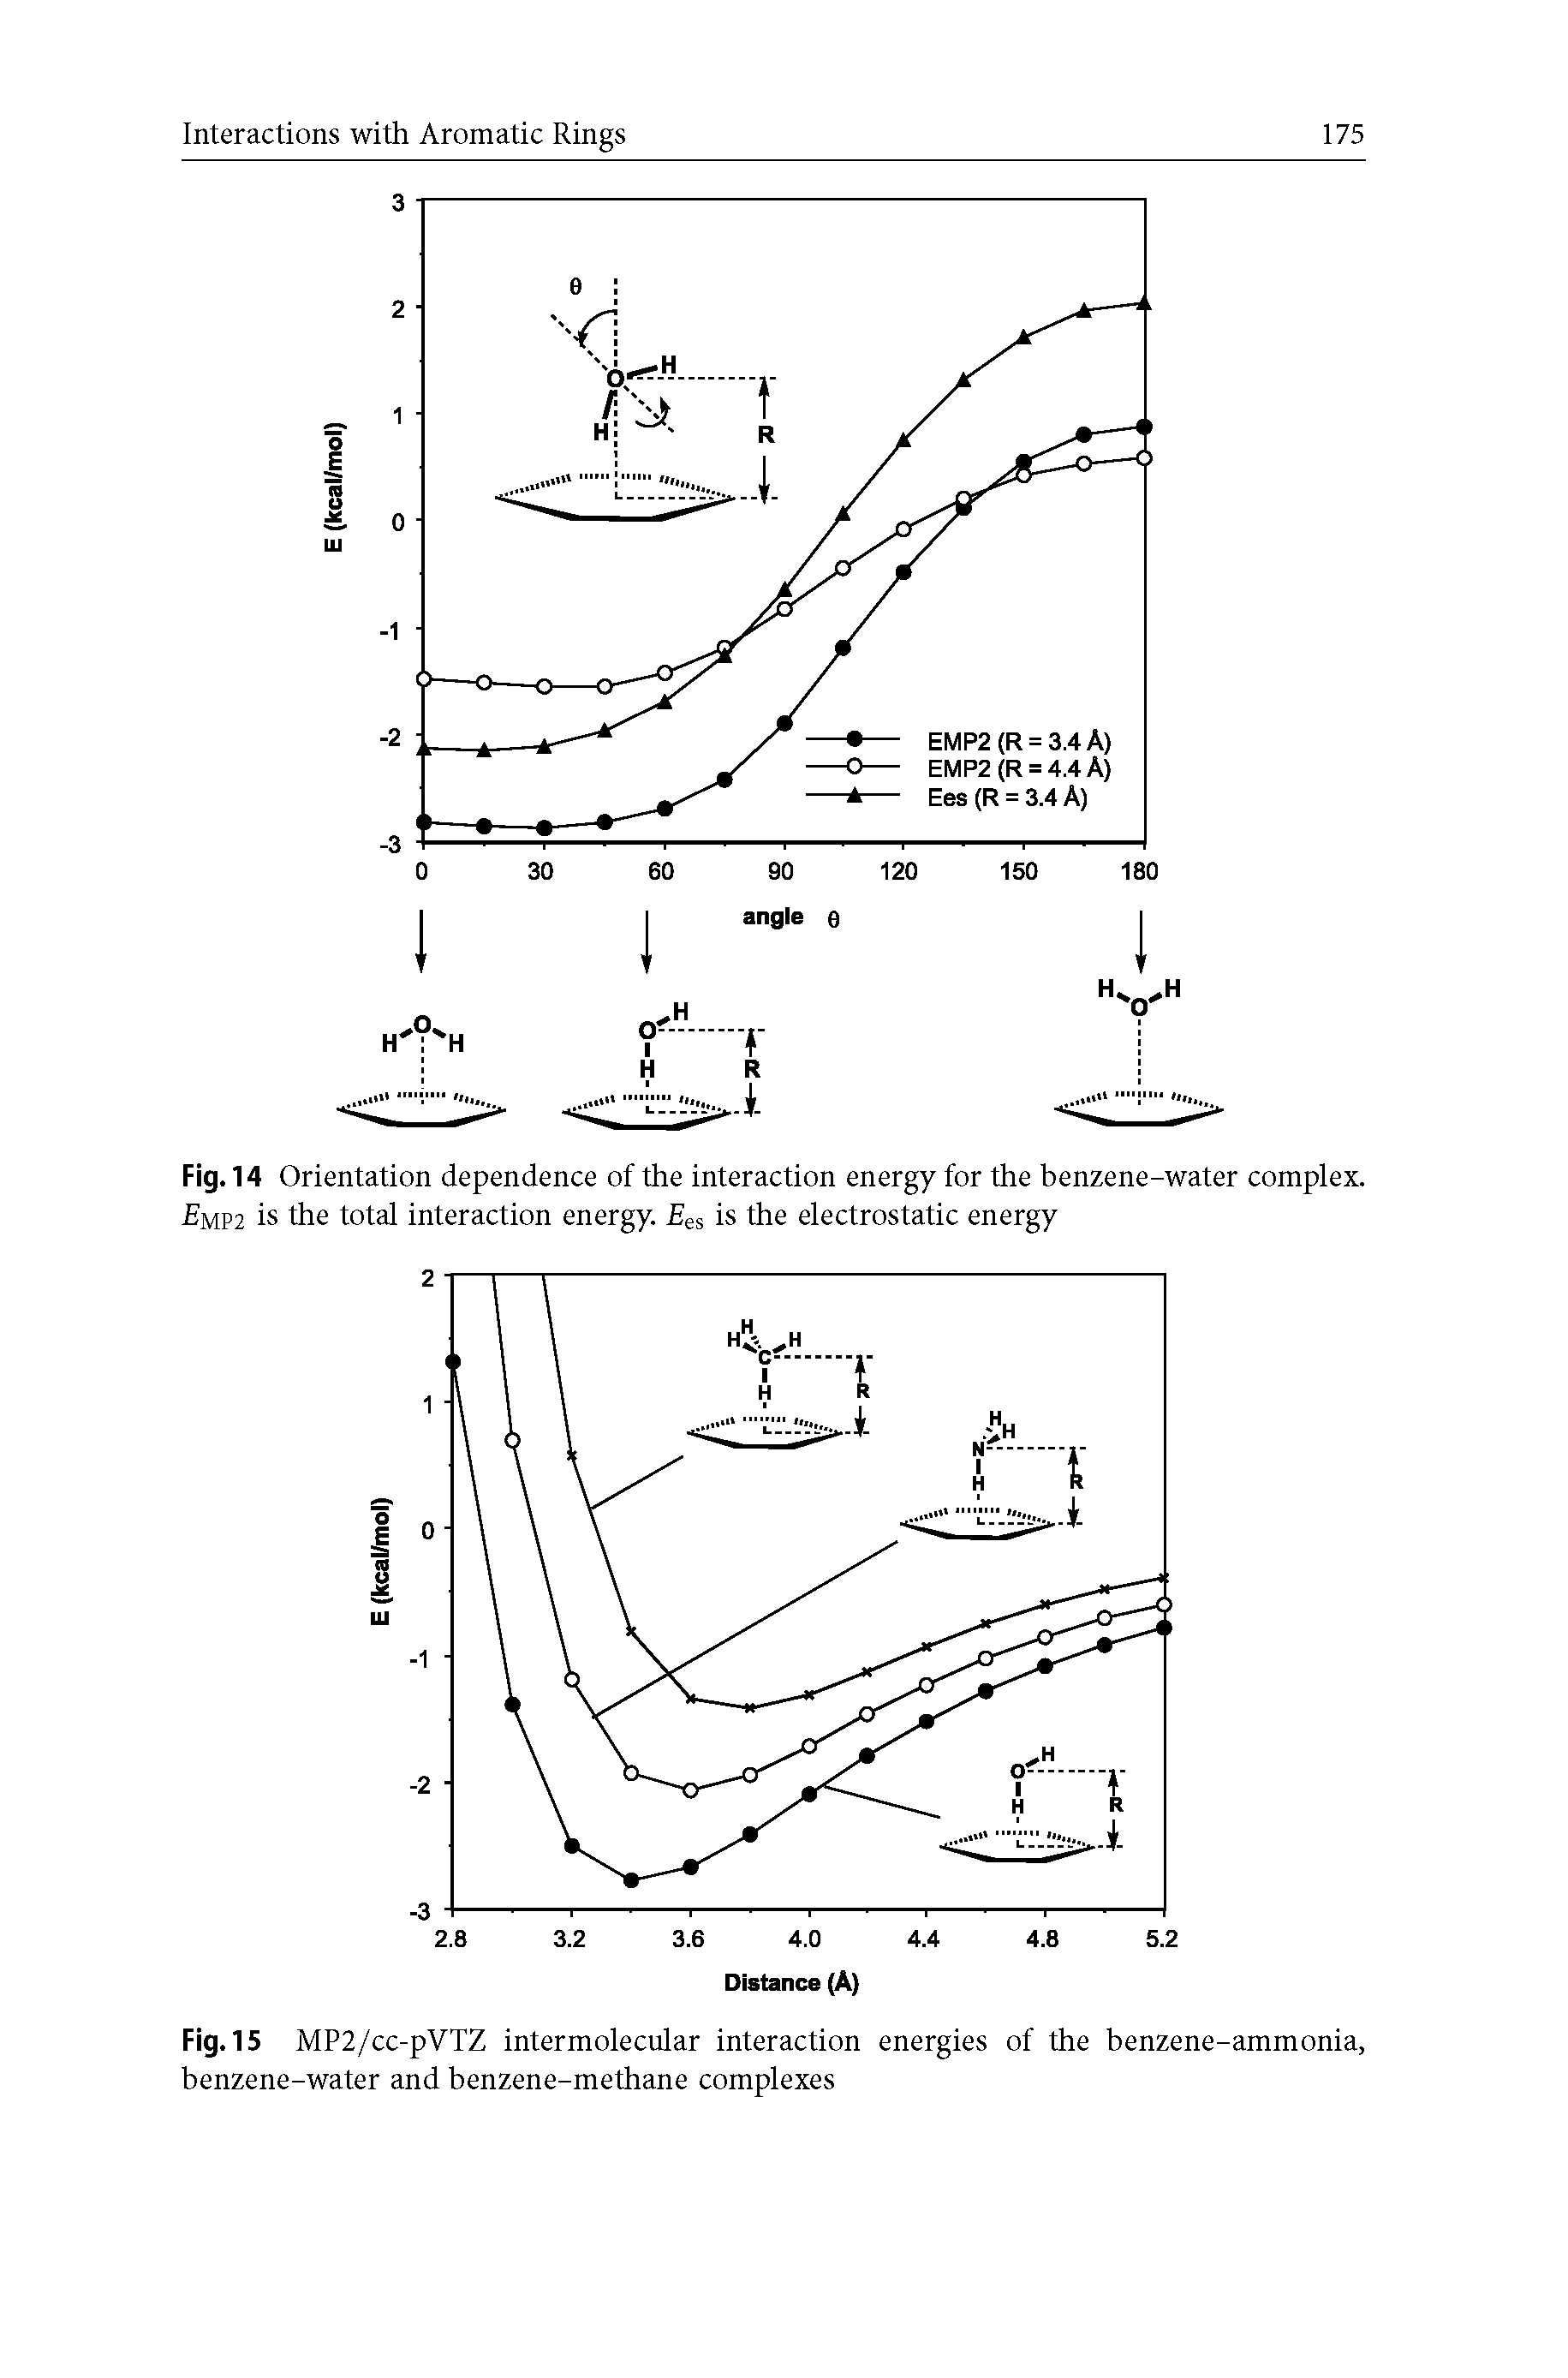 Fig. 14 Orientation dependence of the interaction energy for the benzene-water complex. Emp2 is the total interaction energy. es is the electrostatic energy...